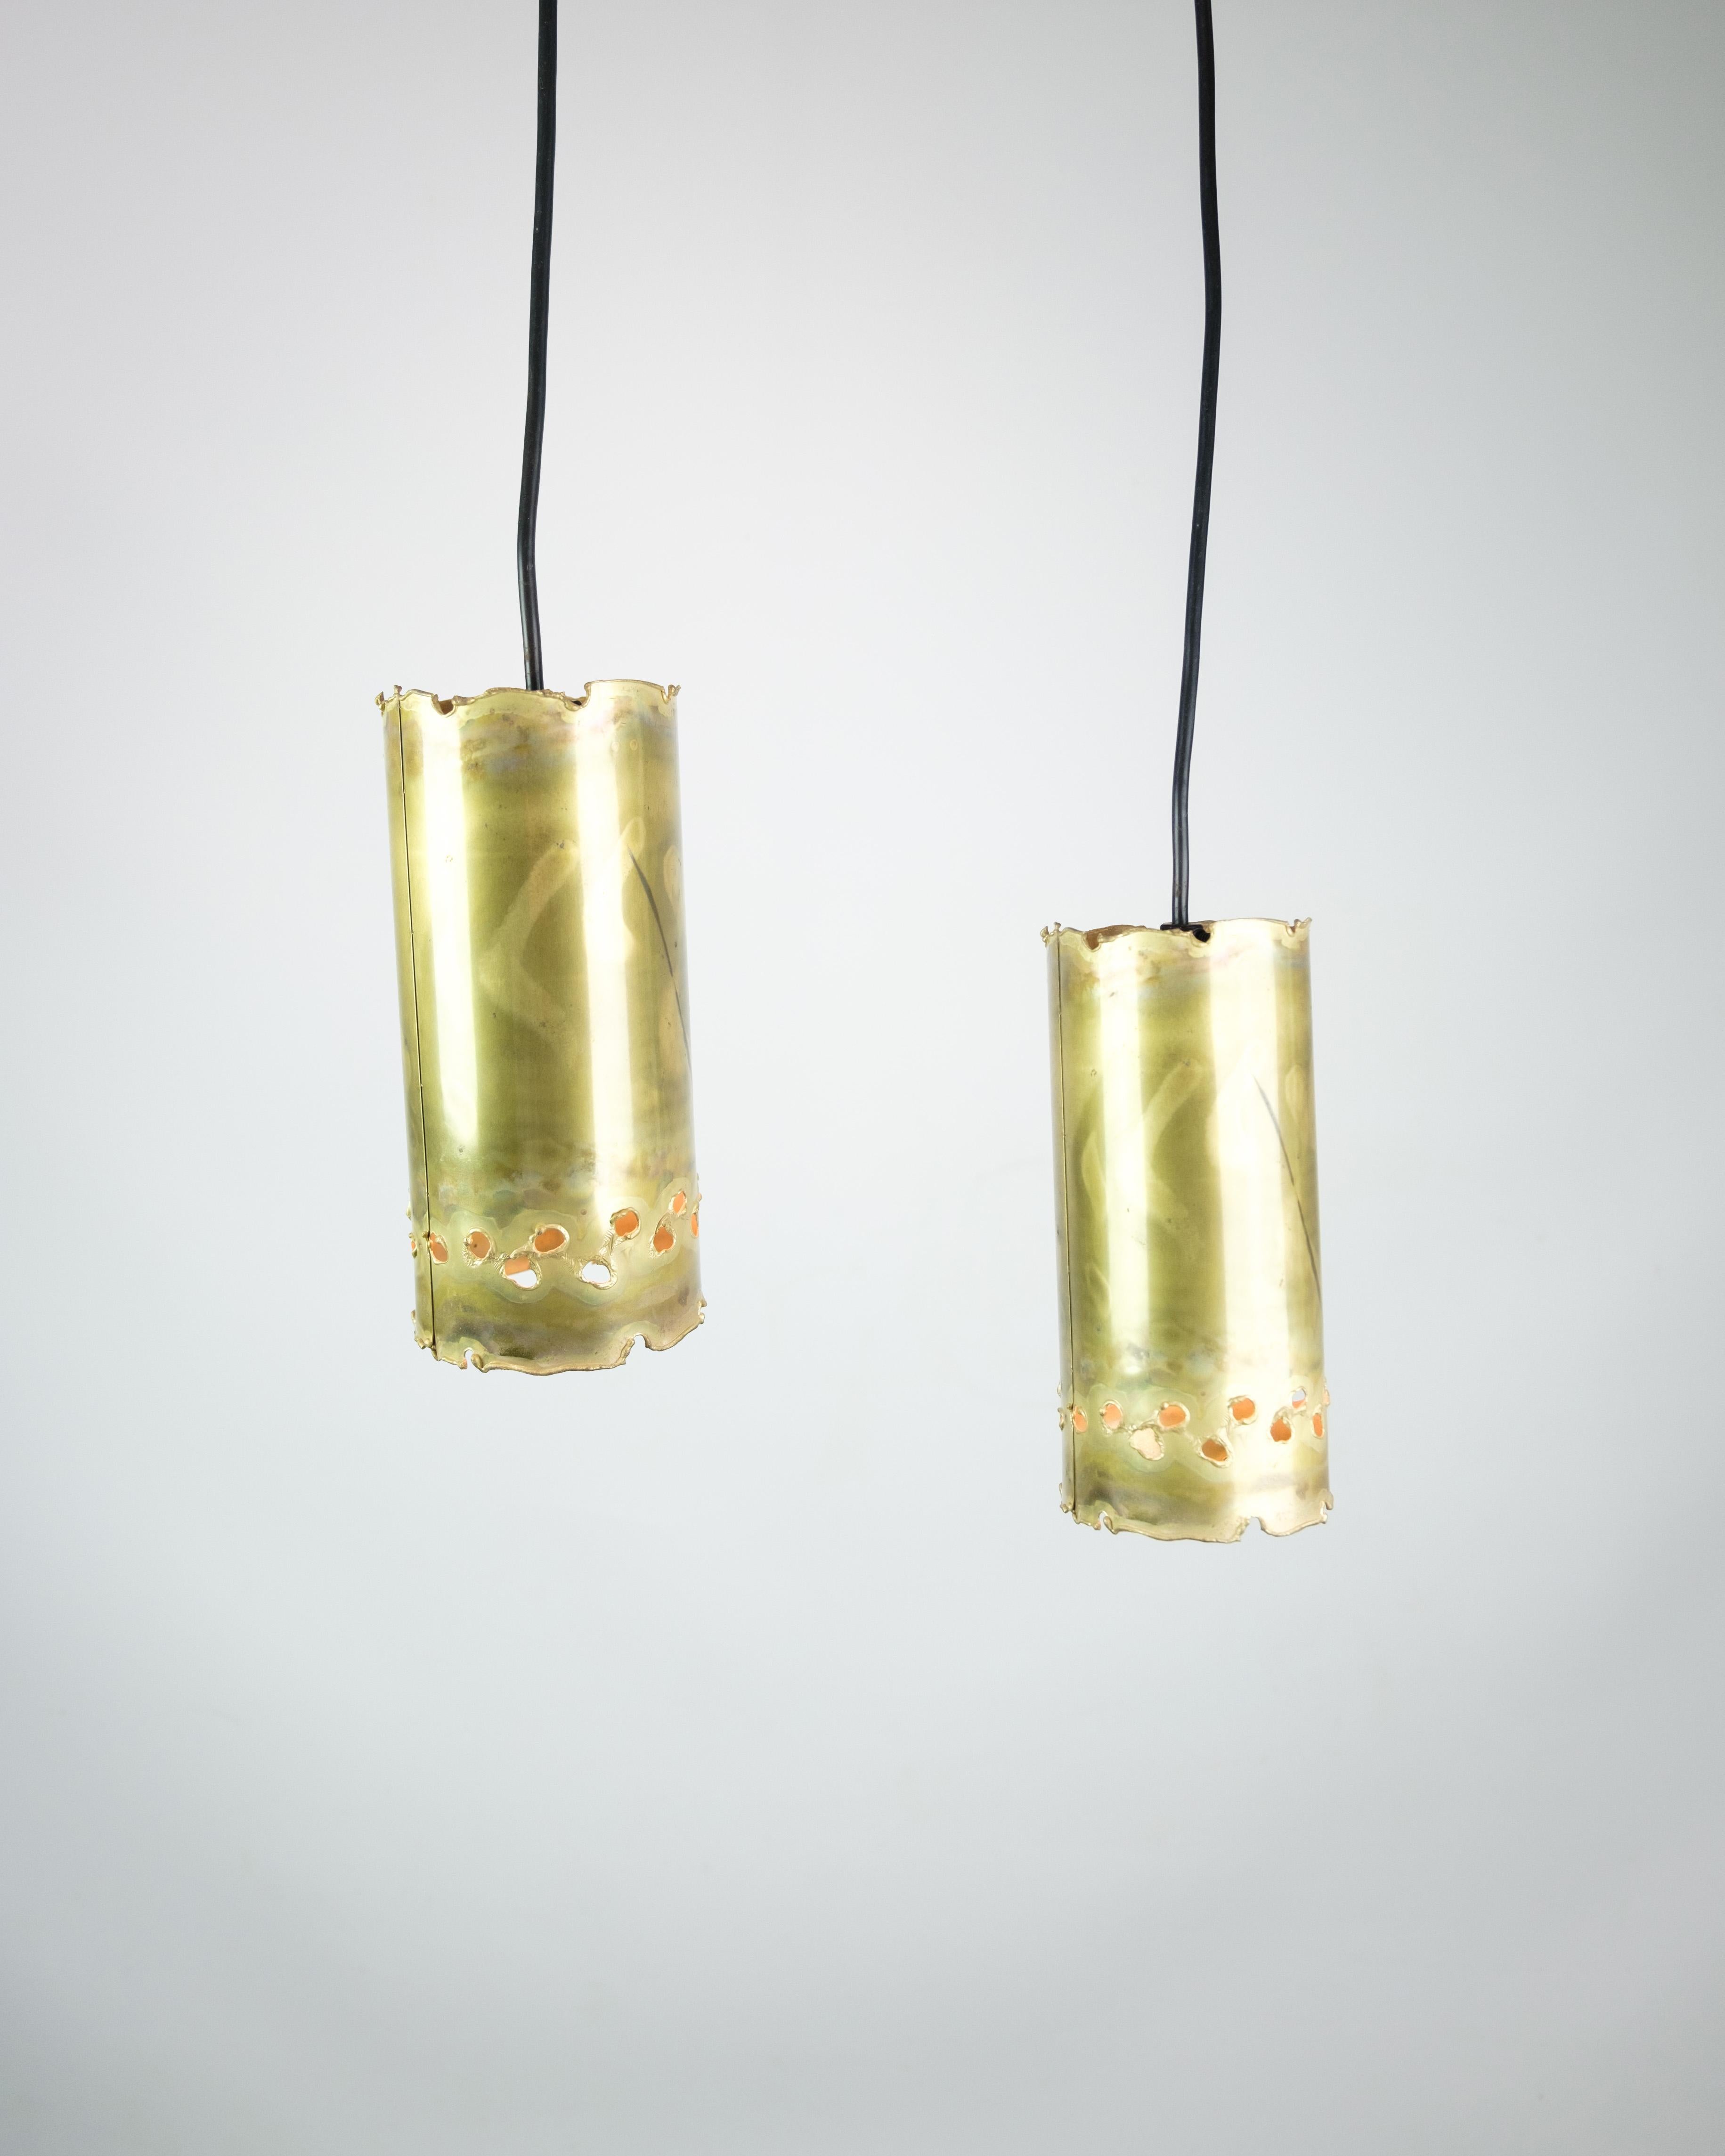 The brass ceiling lamp, characterized by a characteristic cylinder shape and a black cord, is a remarkable example of lighting design from the 1960s, created by the talented designer Sven Aage Holm Sørensen. This iconic piece captures the spirit of